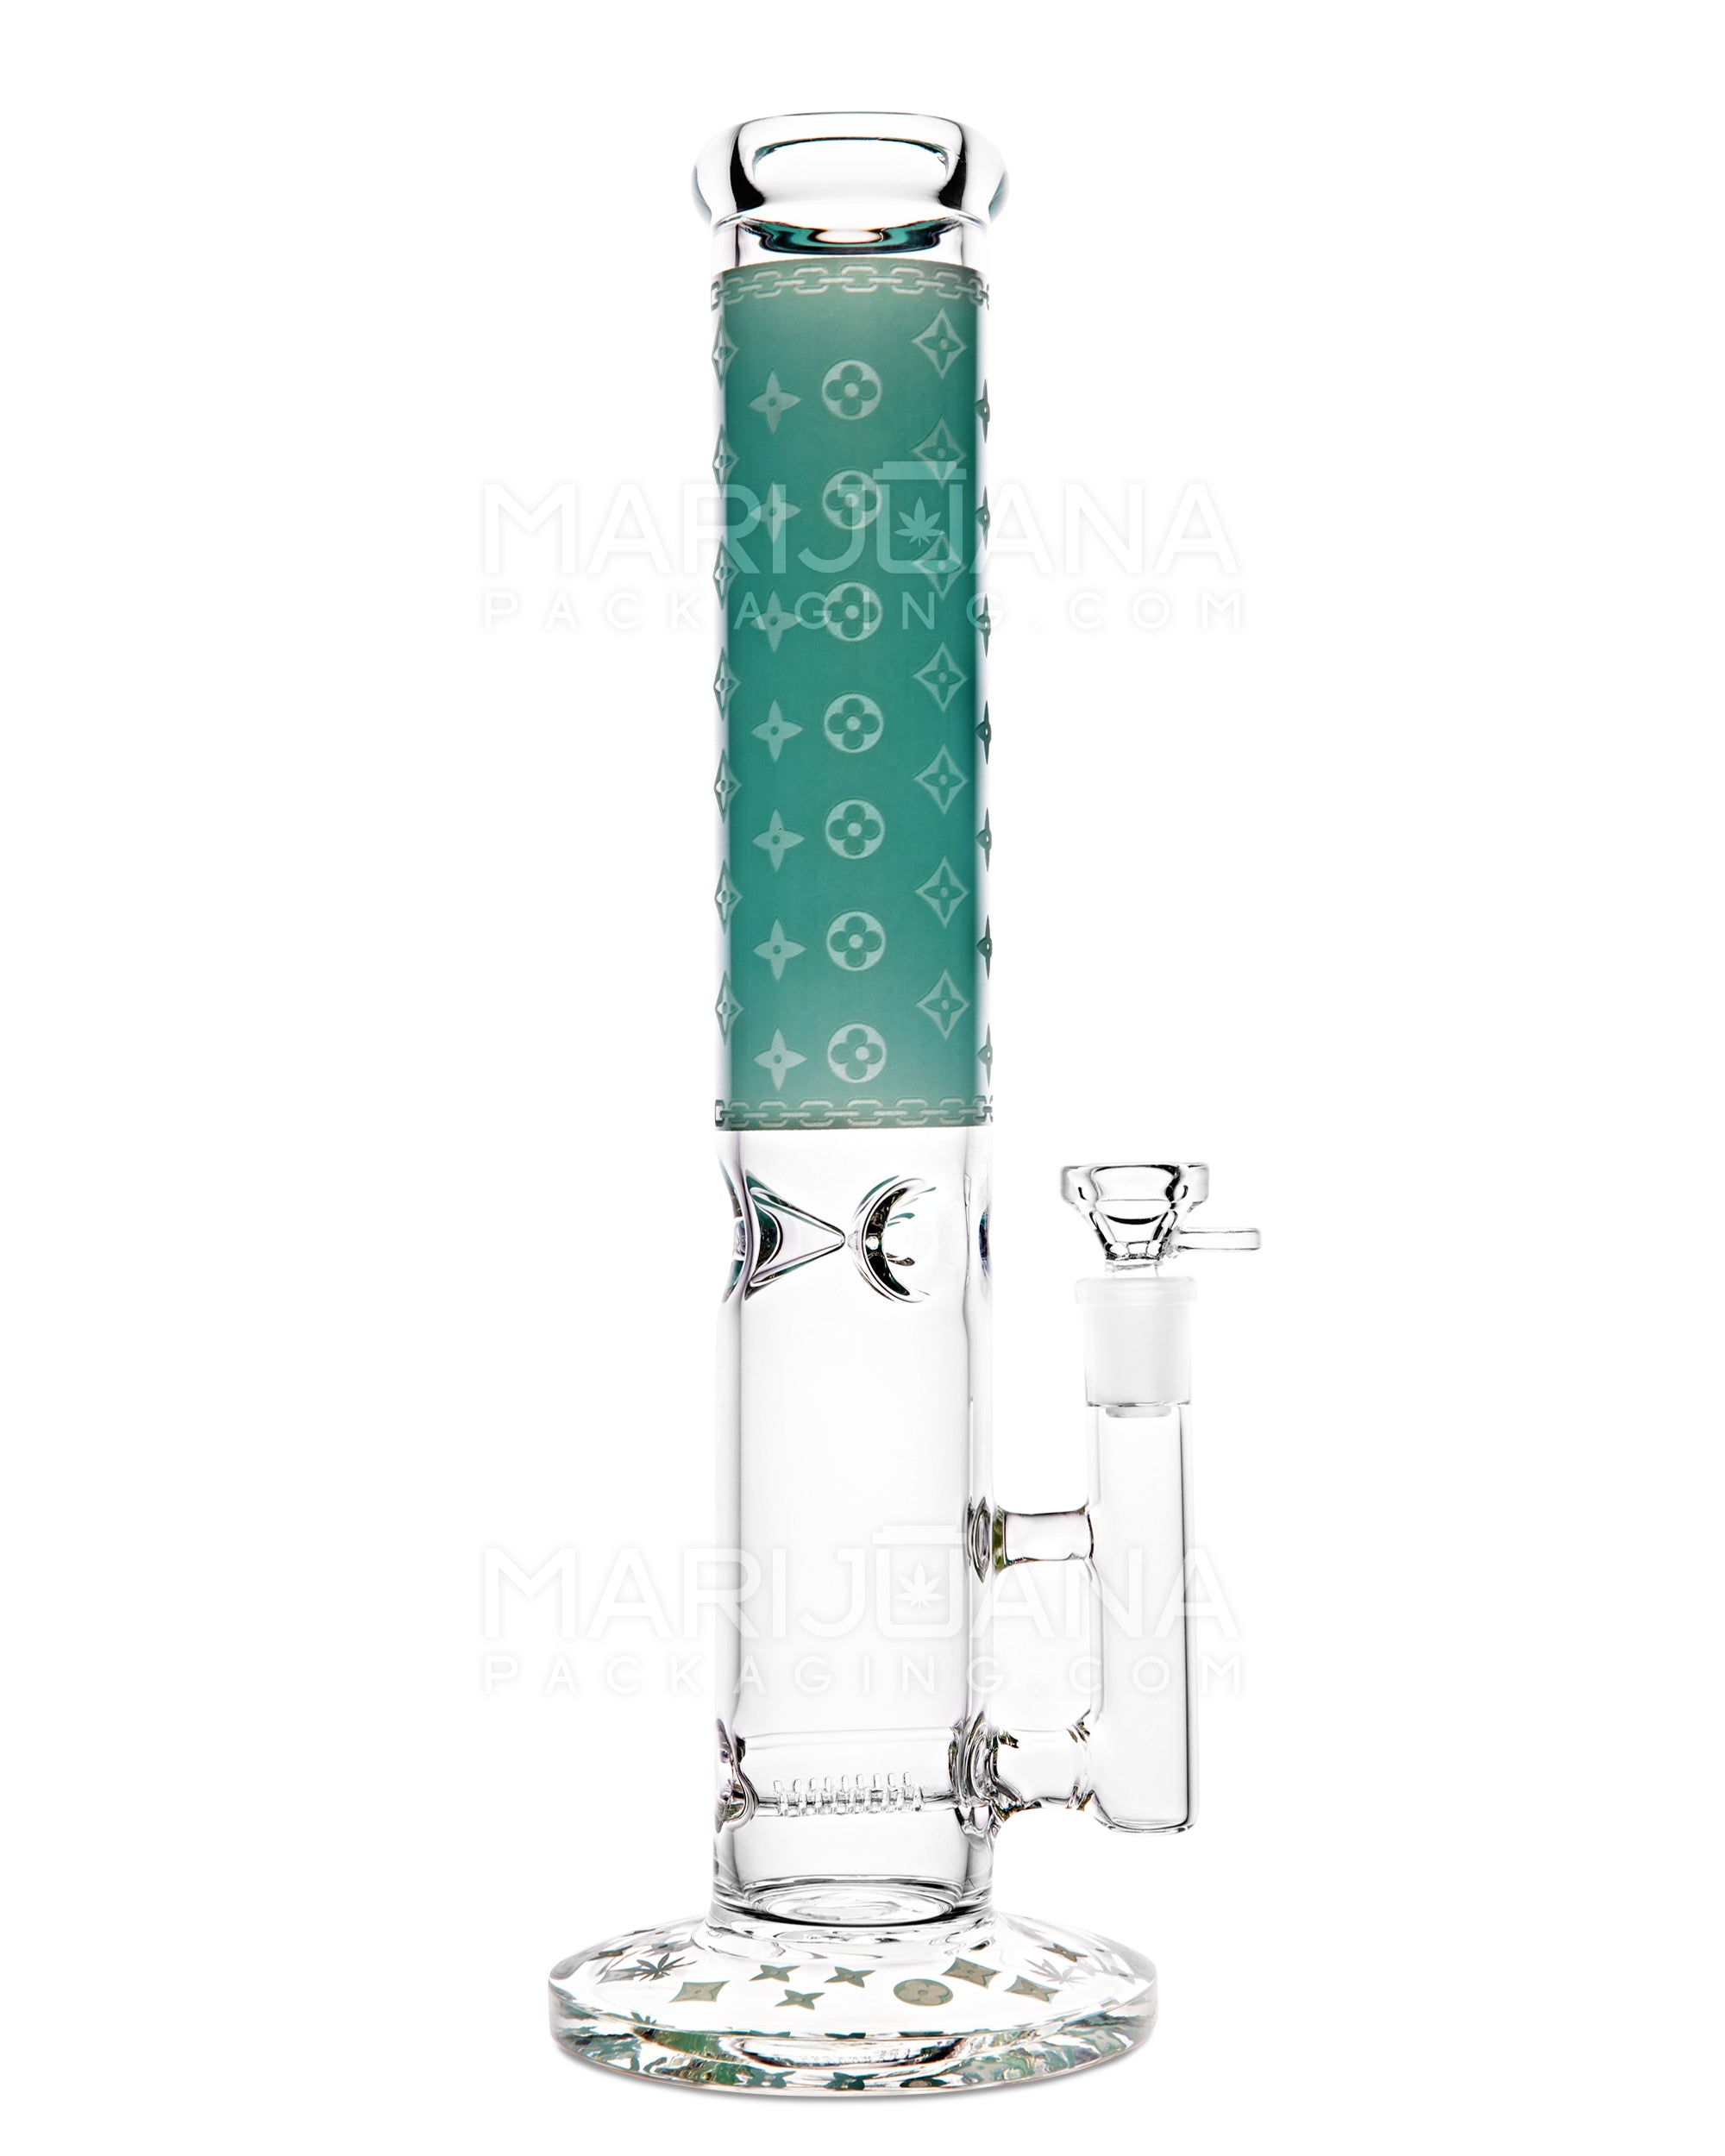 Straight Neck Luxury Design Inline Perc Glass Water Pipe w/ Ice Catcher | 14in Tall - 14mm Bowl - Blue - 1